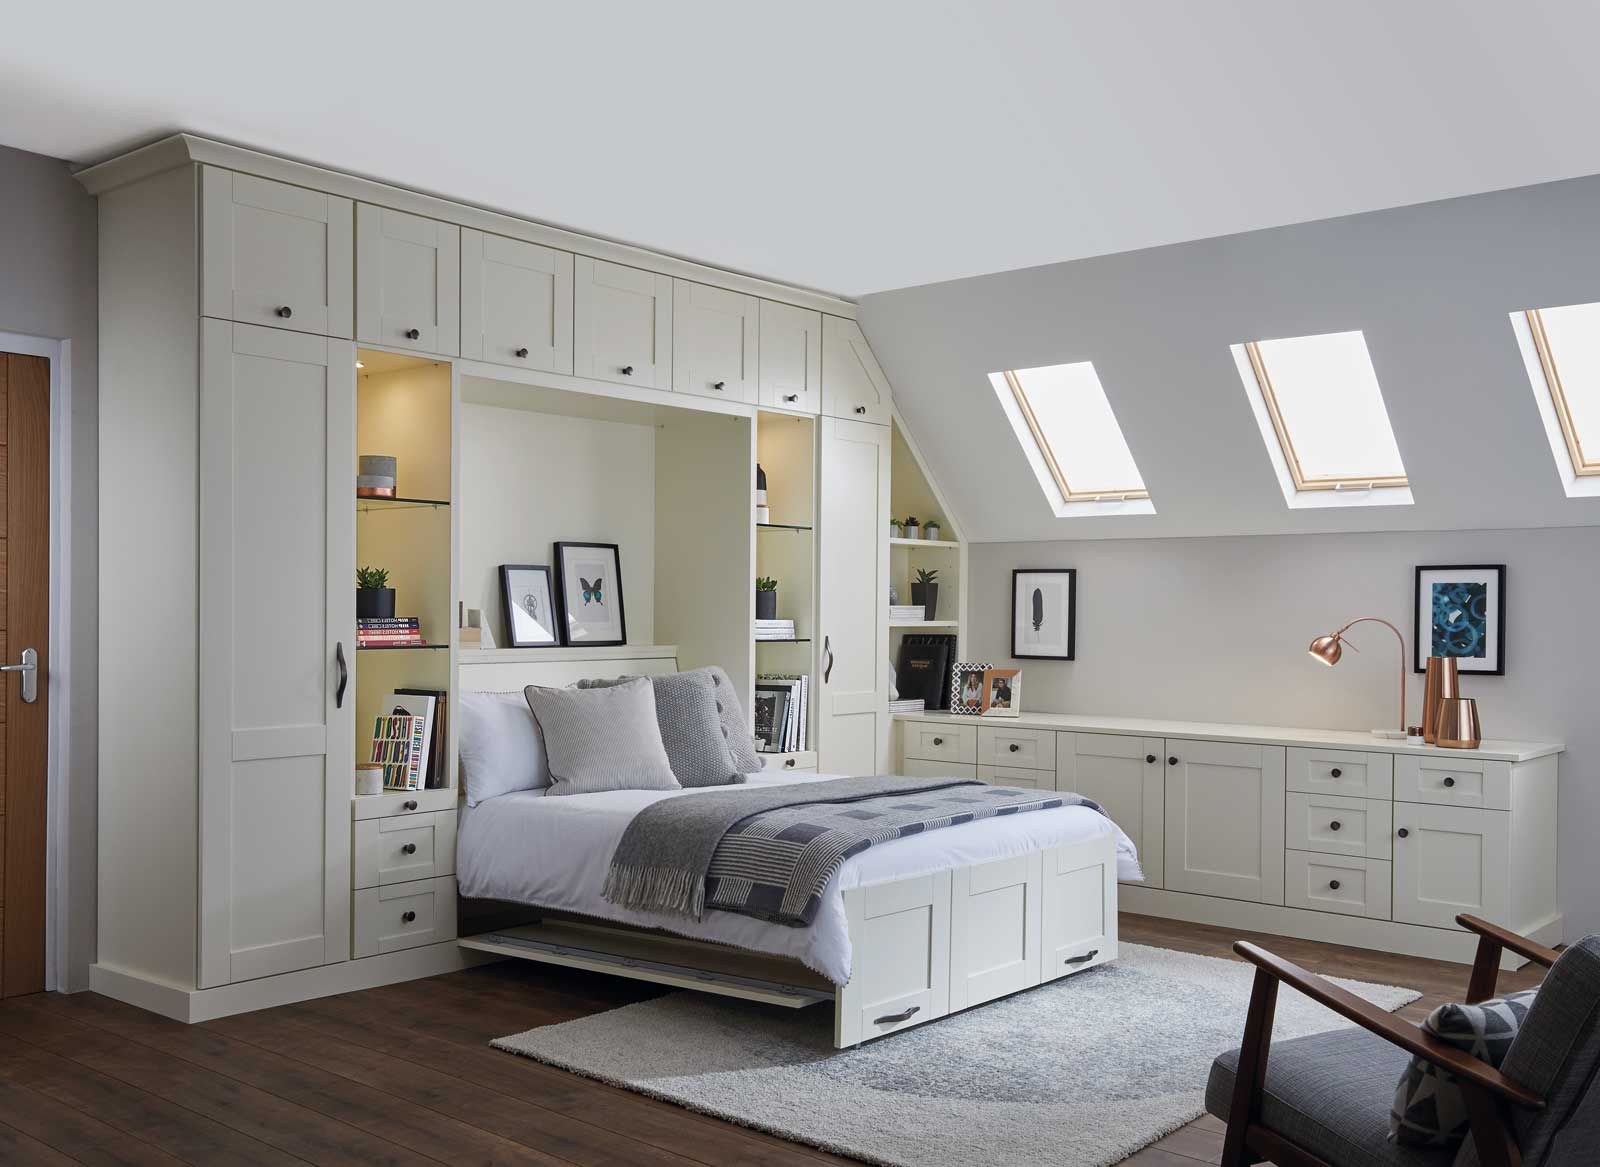 Space Saving Wall Beds | Pull Down & Fold Away Beds | Strachan Pertaining To Wardrobes Beds (View 3 of 20)